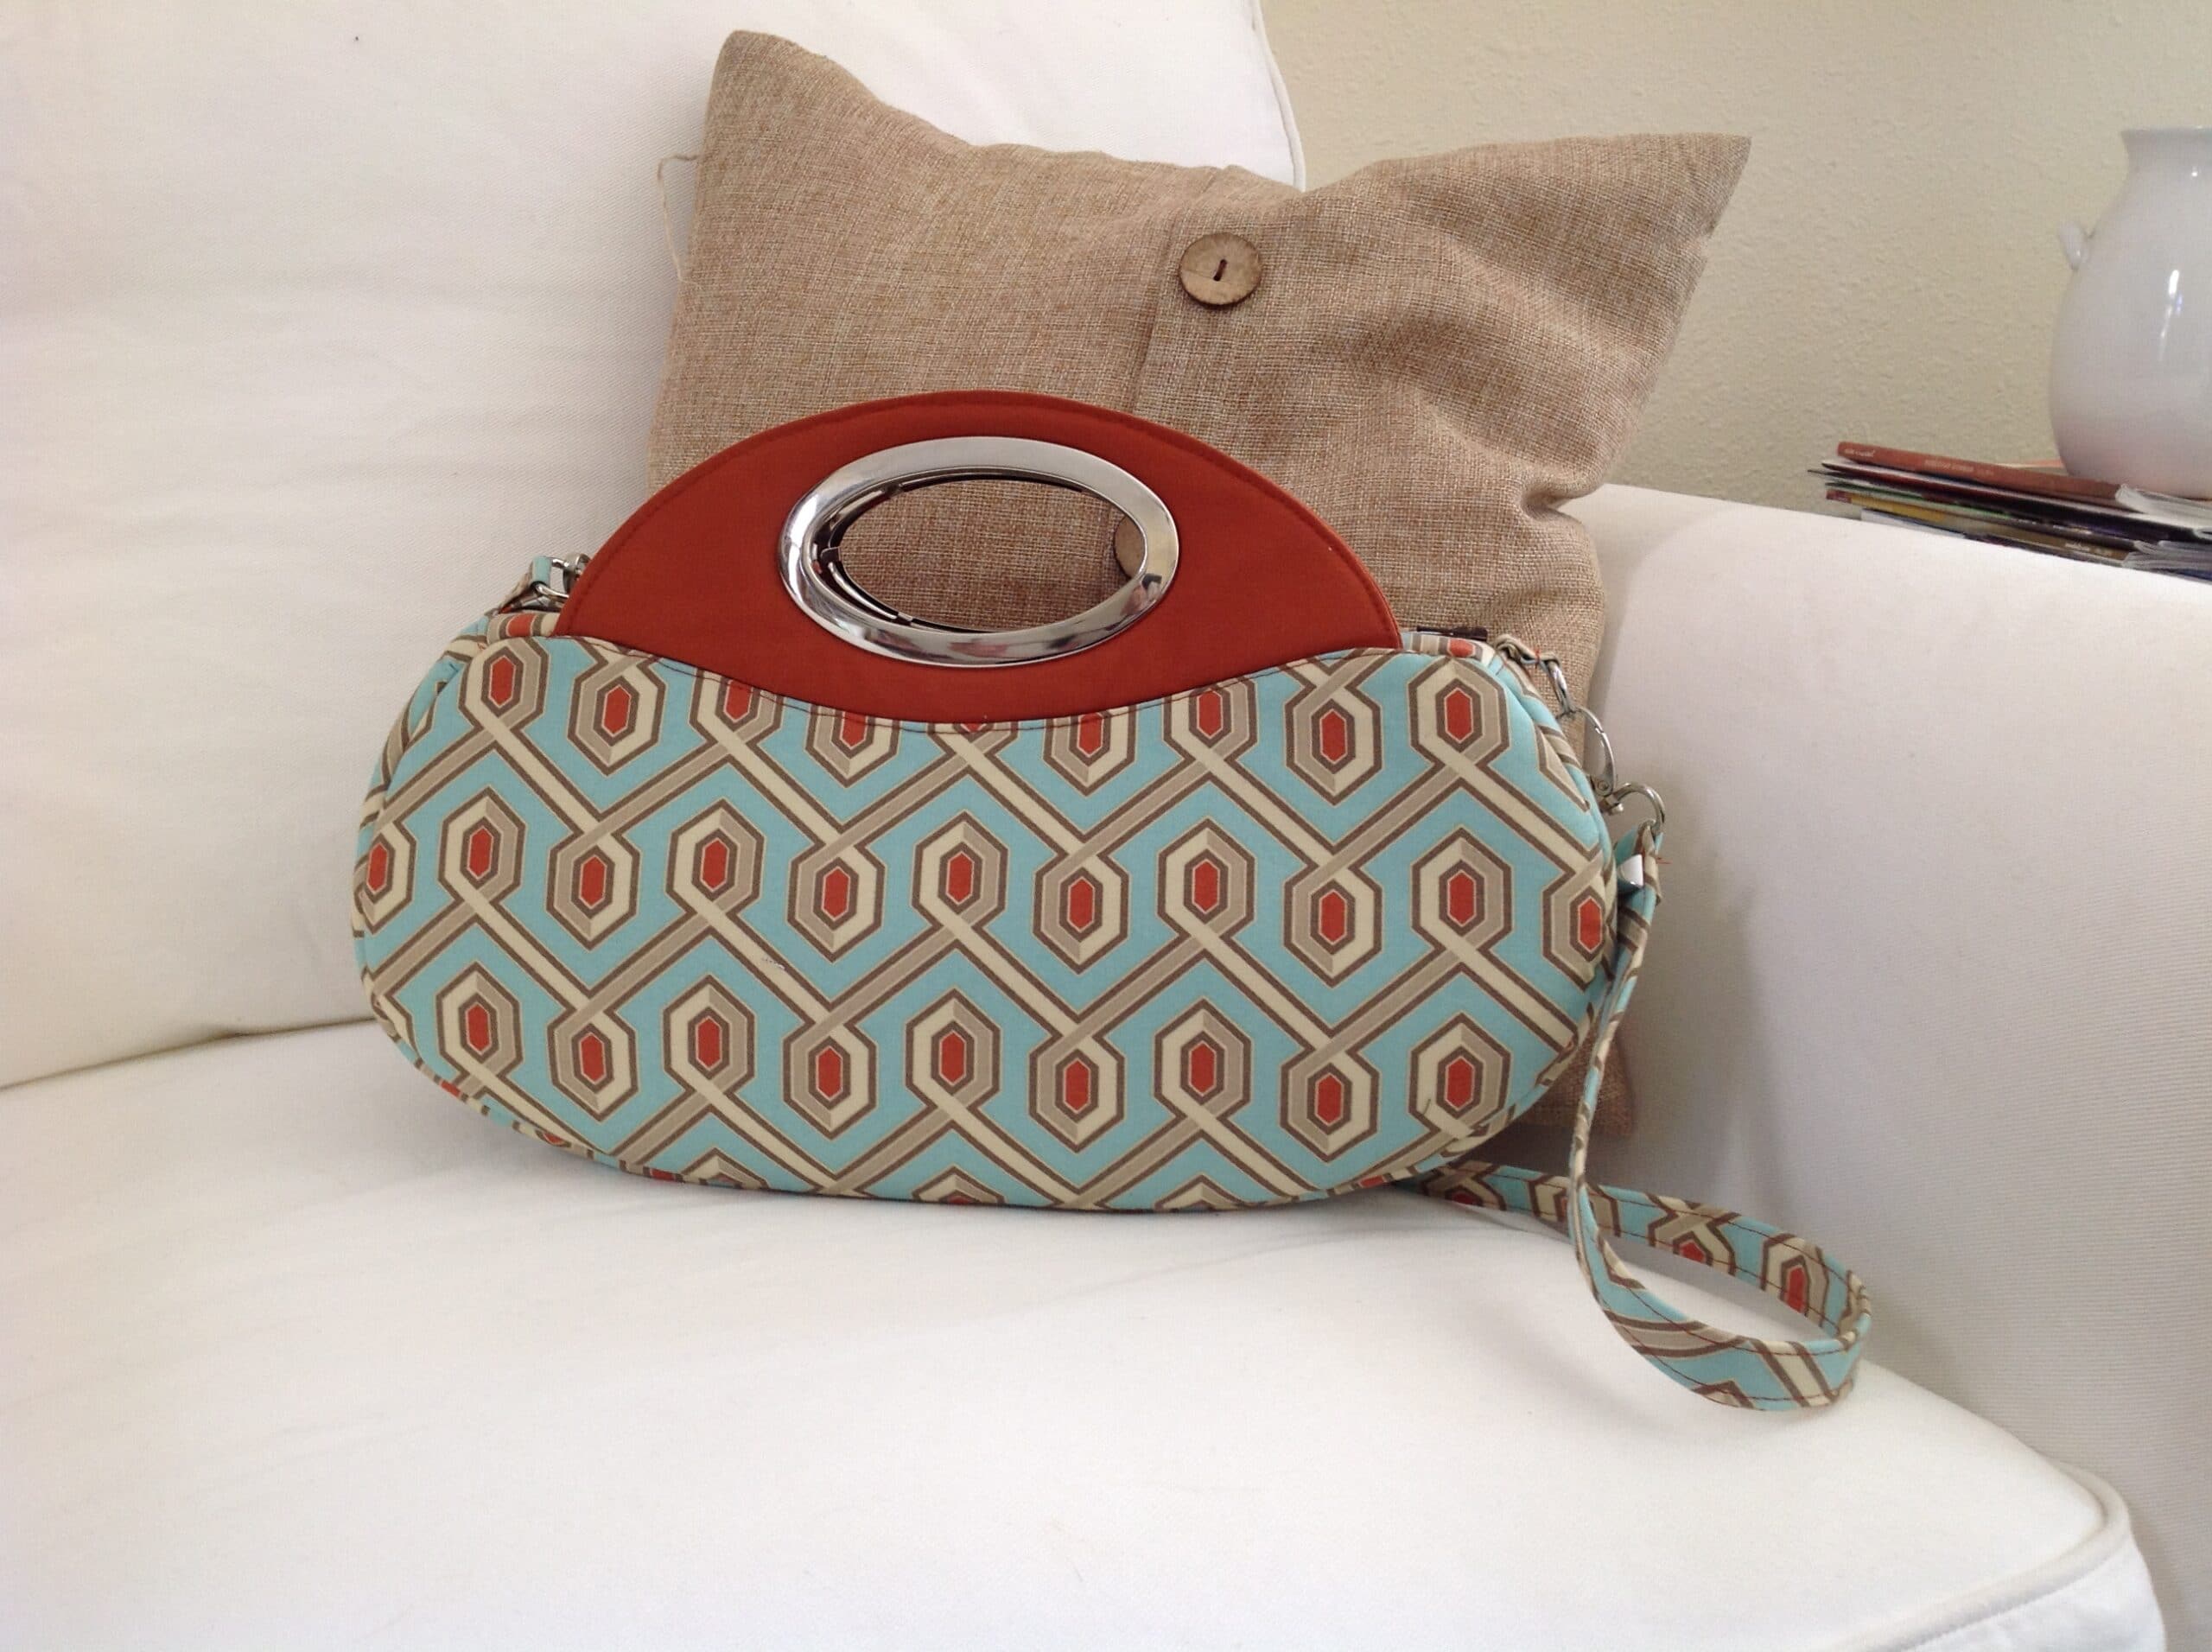 Emmaline Bags: Sewing Patterns and Purse Supplies: The Bow Clutch: An  Evening Bag Beauty!